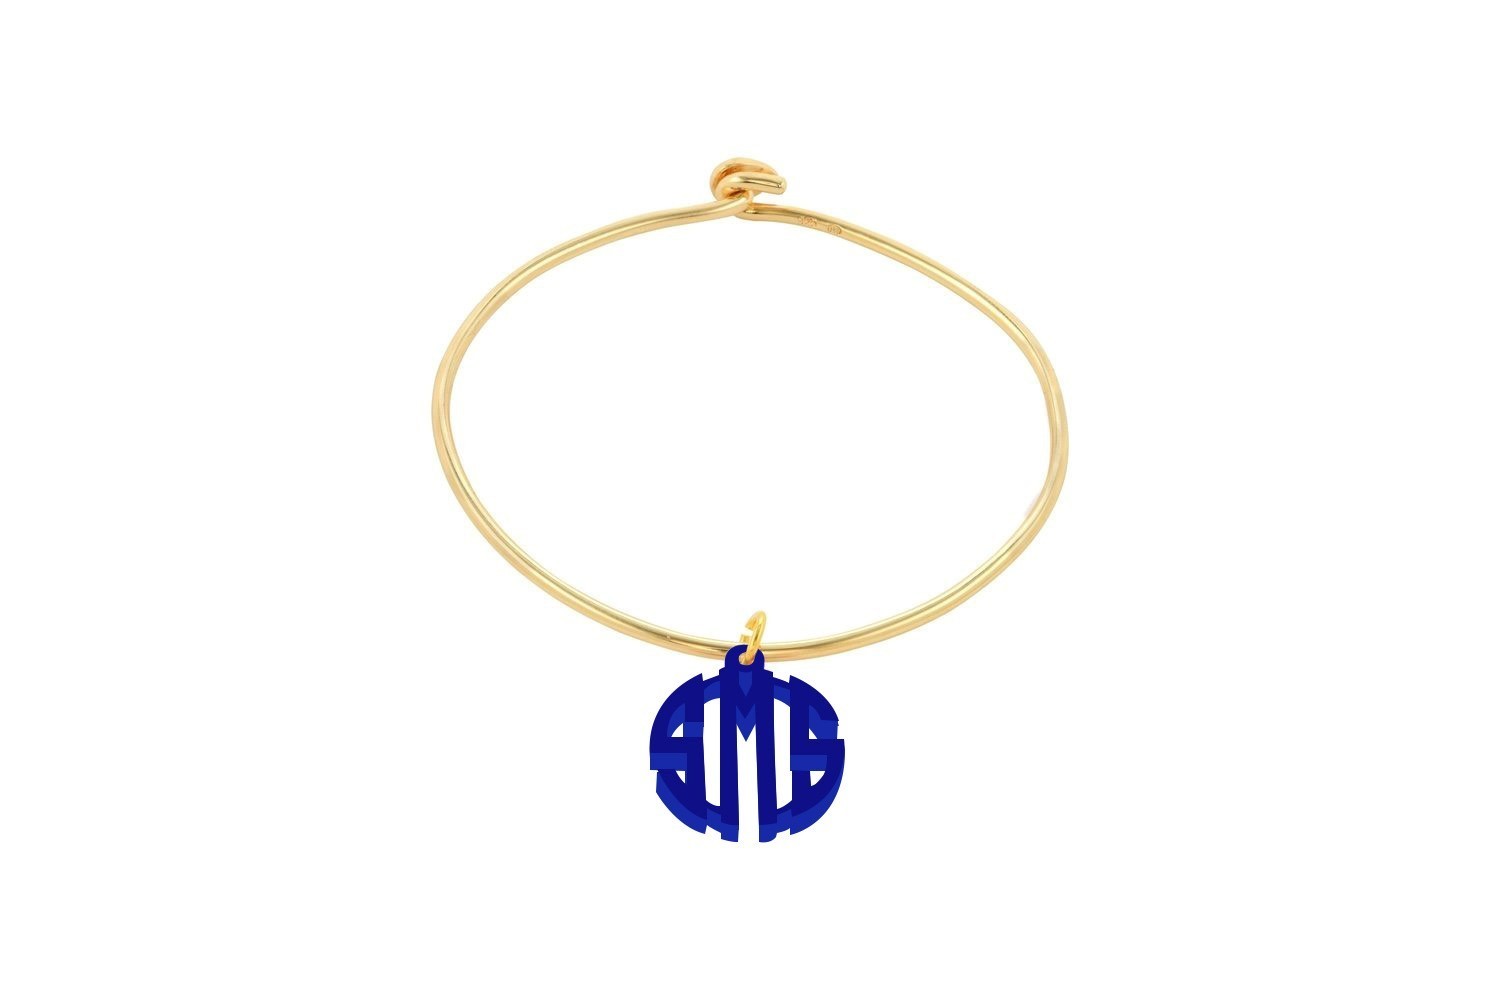 Clean Block Monogram with Sterling Silver Bangle Bracelet with Yellow Gold Plating